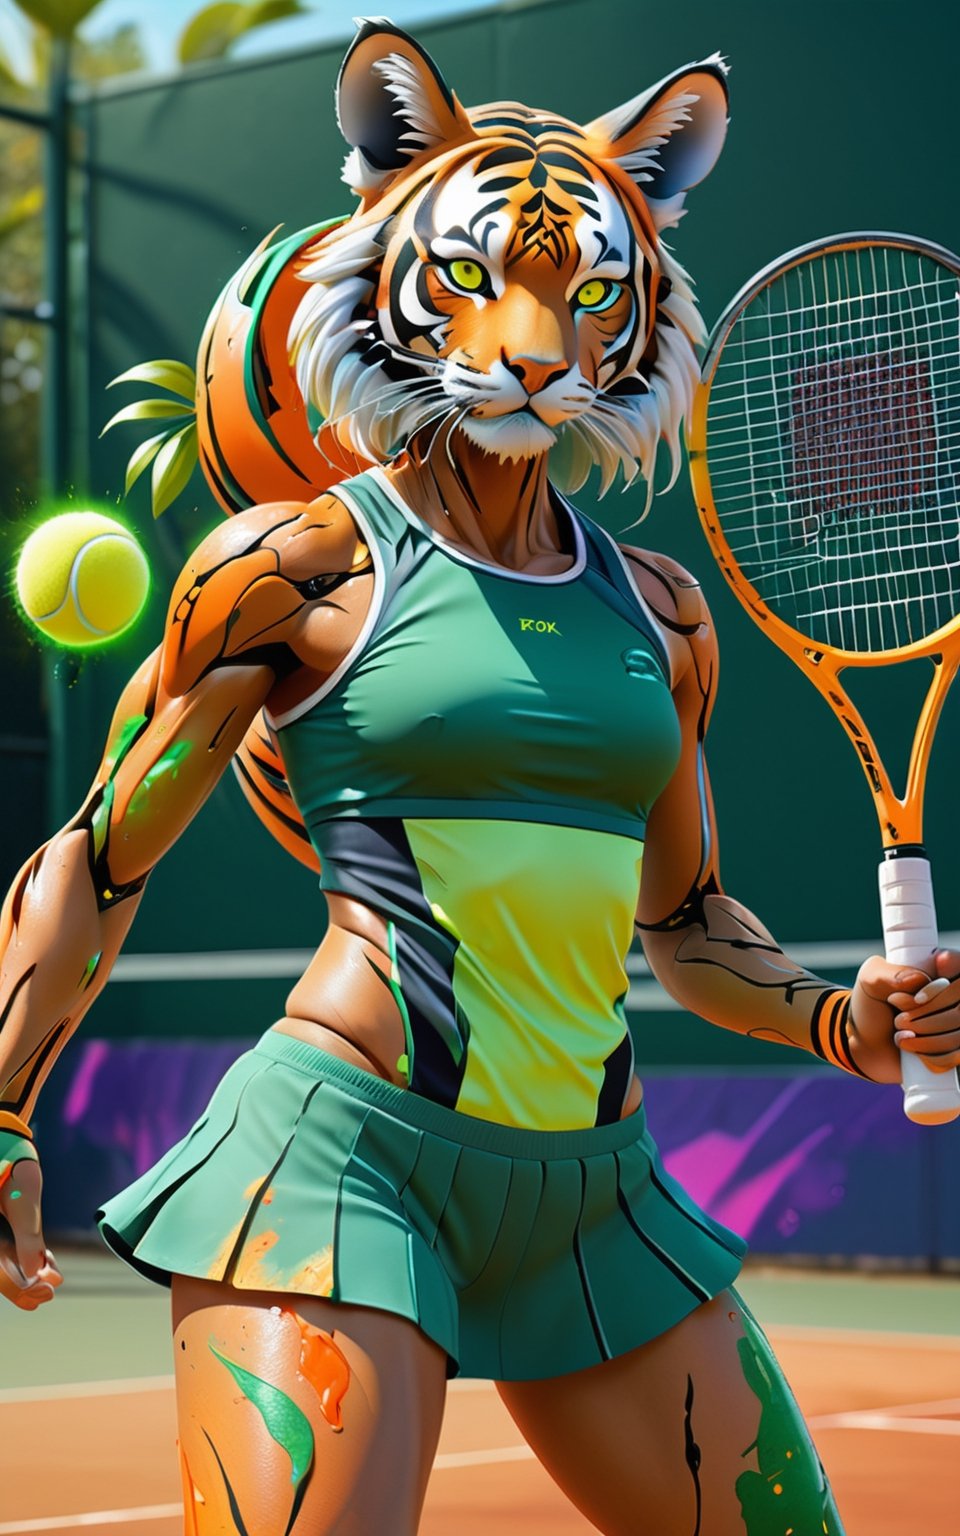 (fullbody:1) of Tiger tennis player in tennis court, (masterpiece:1.1), (highest quality:1.1), (HDR:1.0), extreme quality, cg, (negative space), detailed face+eyes, 1girl, fox ears, (plants:1.18), (fractal art), (bright colors), splashes of color background, colors mashing, paint splatter, complimentary colors, neon, compassionate, electric, limited palette, synthwave, fine art, tan skin, full body, (green and orange:1.2), time stop, sy3, SMM,photo r3al,mecha,DonMCyb3rN3cr0XL 